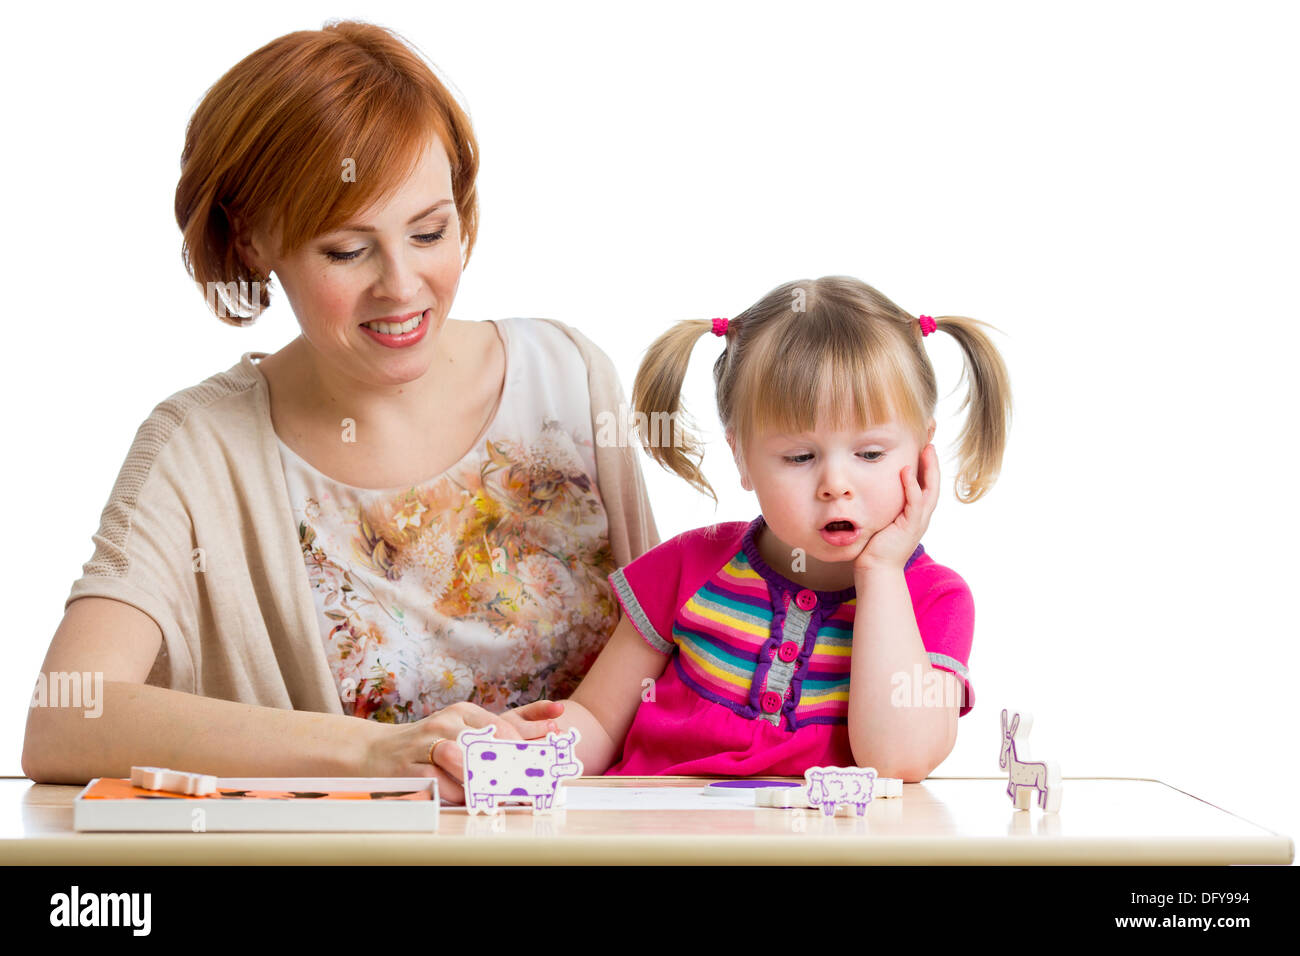 kid and mother have pastime together Stock Photo